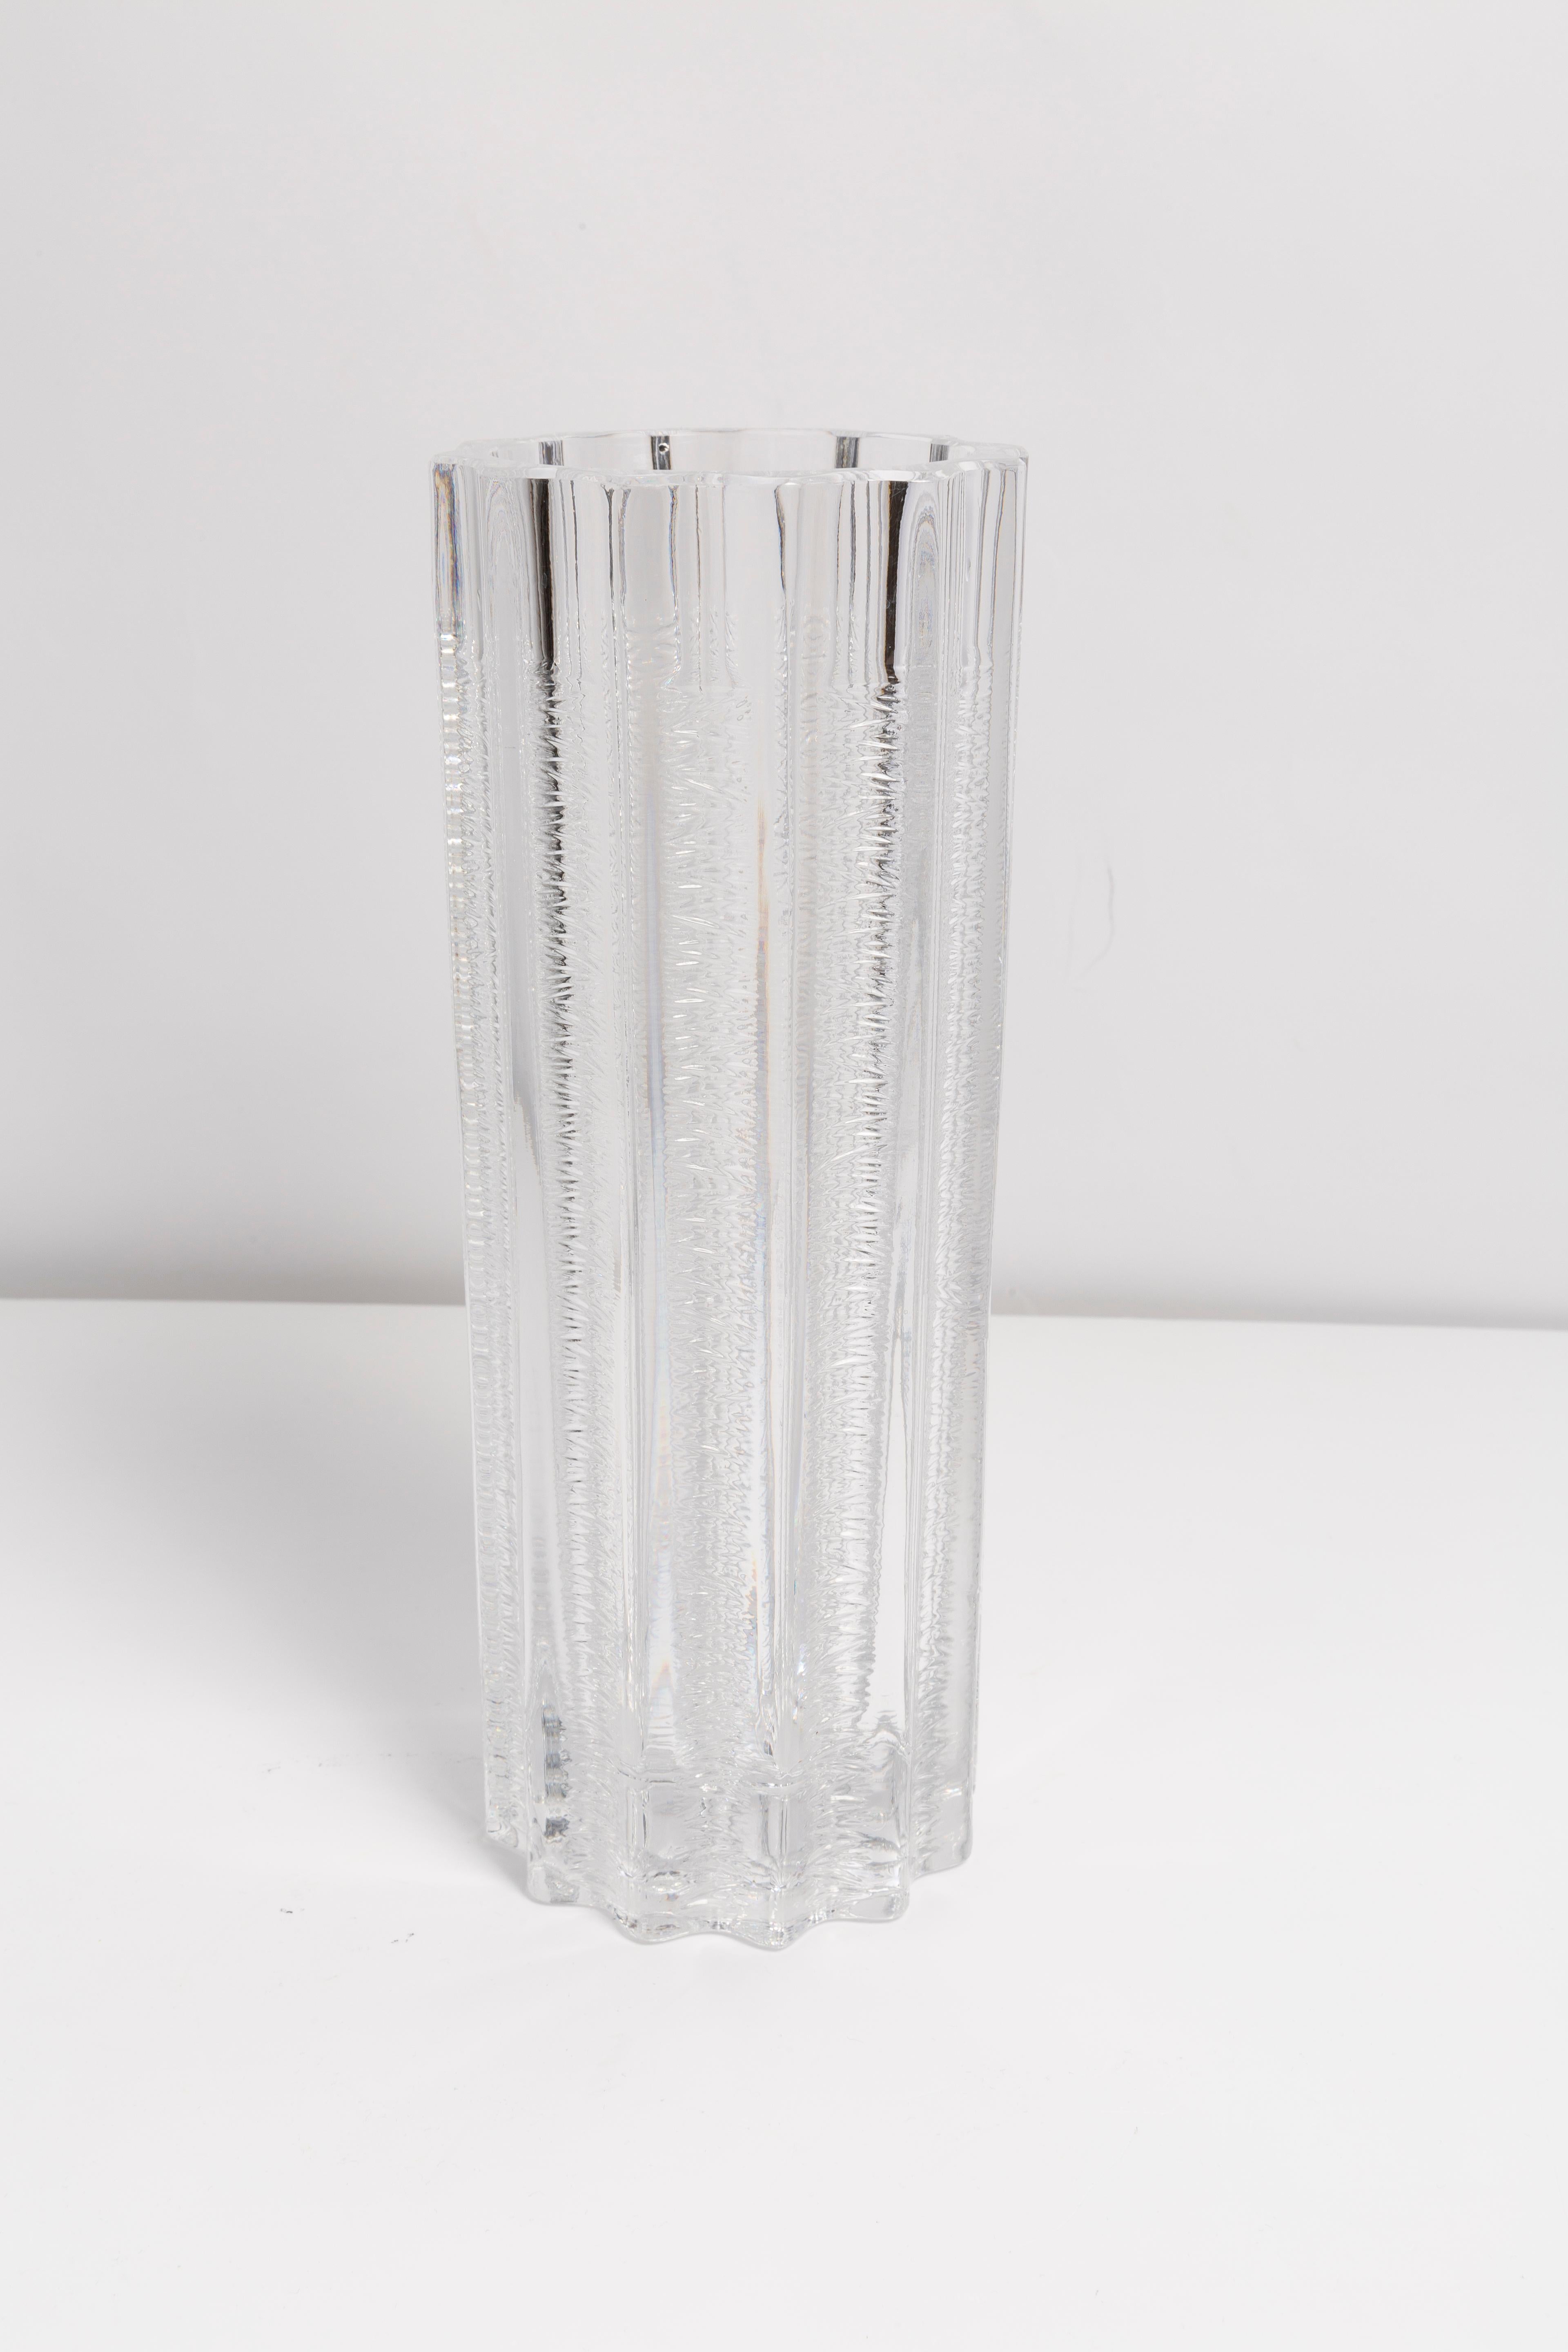 Czech Mid Century Crystal Transparent Vase, Italy, 1960s For Sale